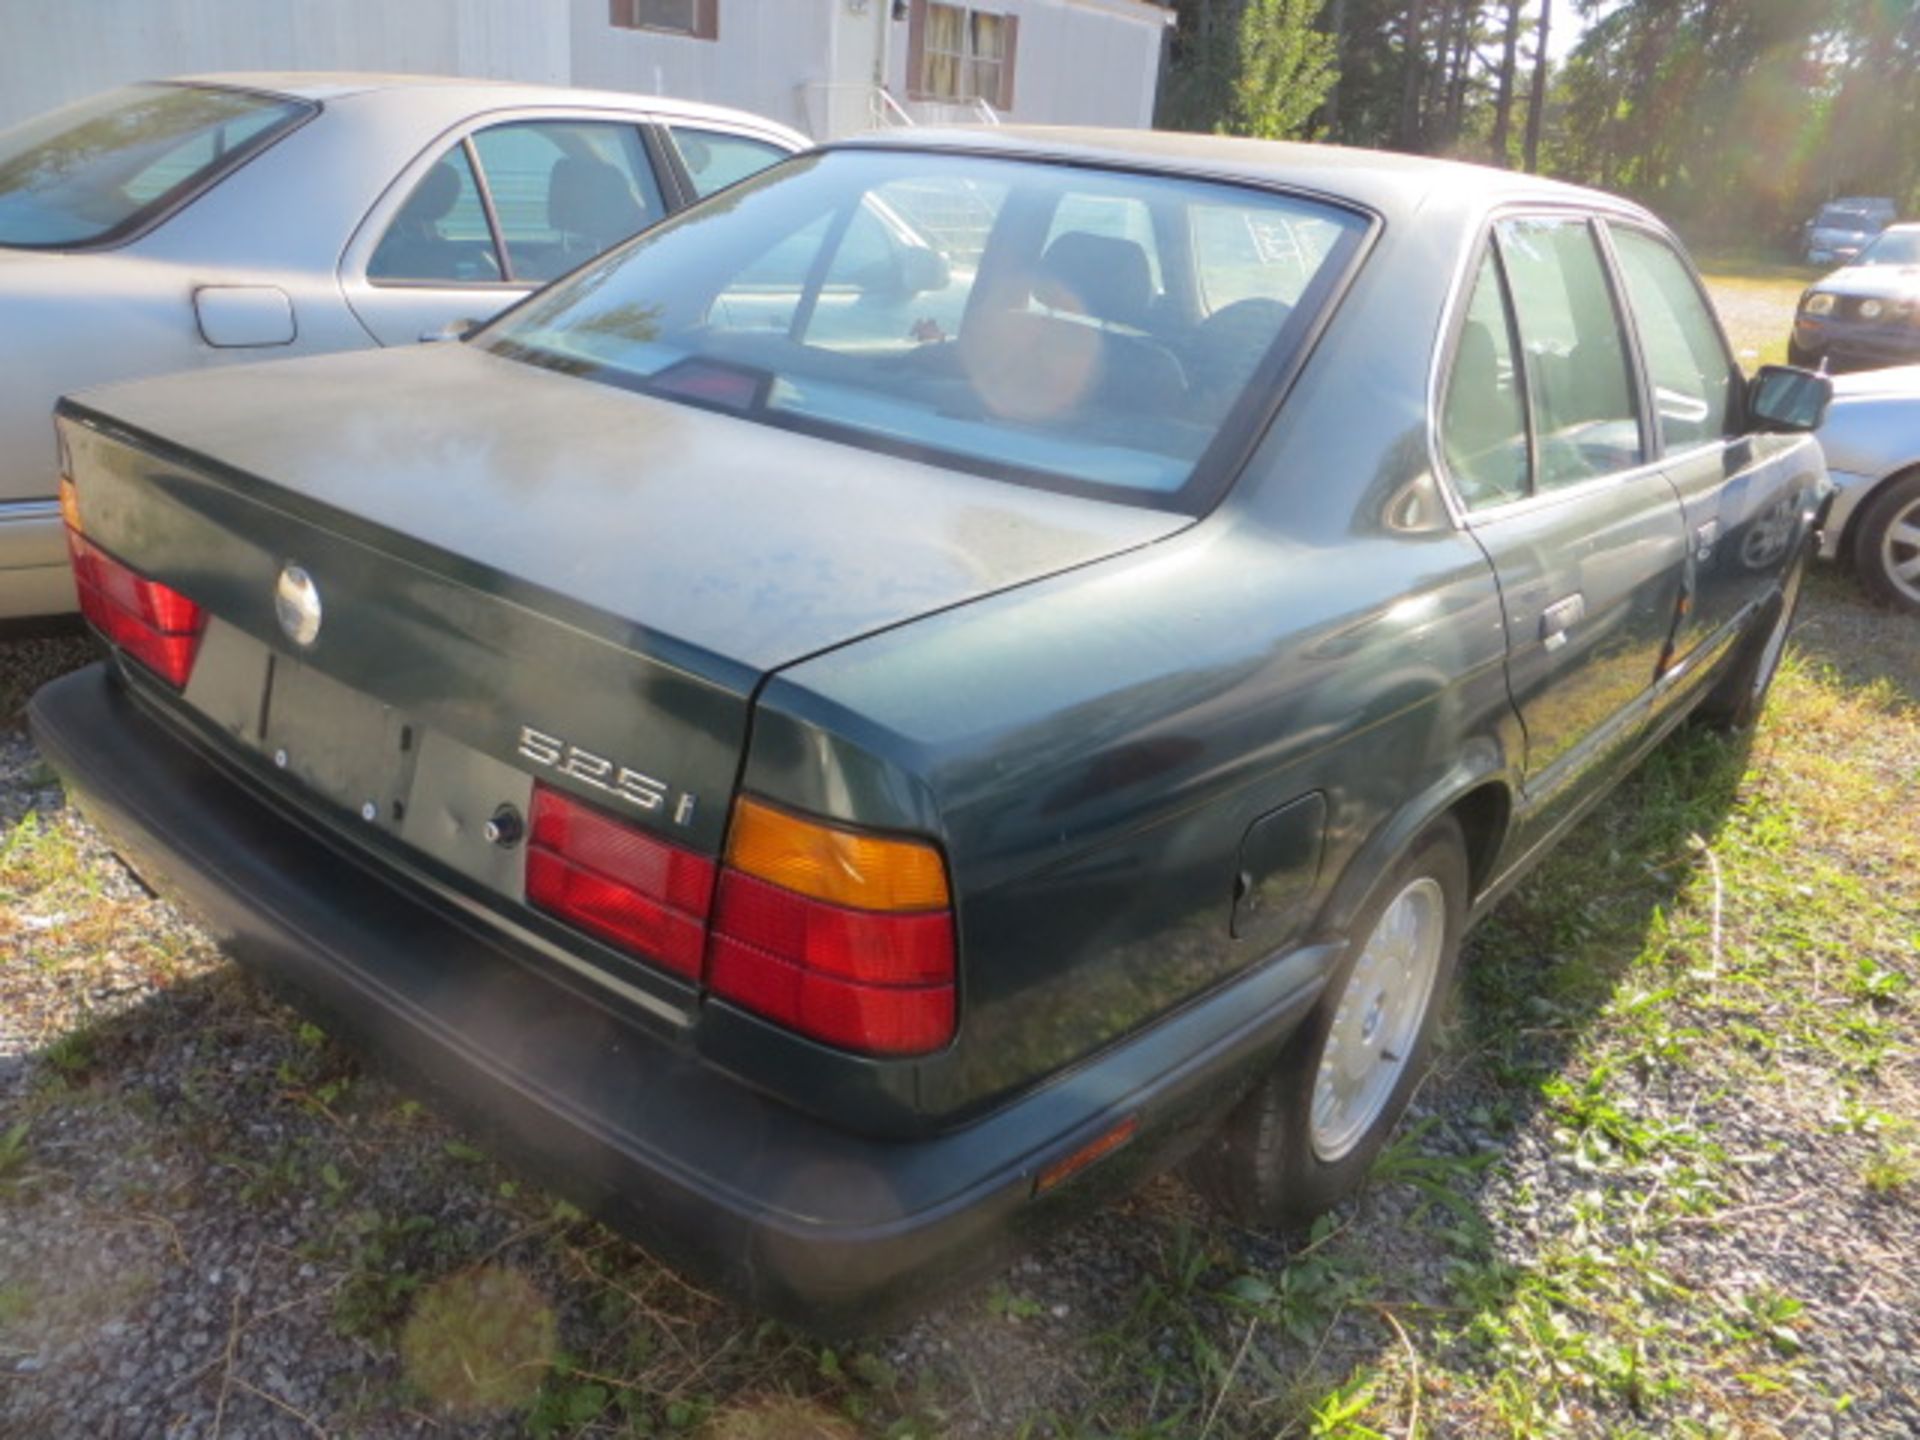 1992 BMW 525i-NEEDS SWITCH-MOLDING OFF SIDES 160000 MILES,VIN WBAHD5312NBF96426, GOOD TRANSFERABLE - Image 3 of 3